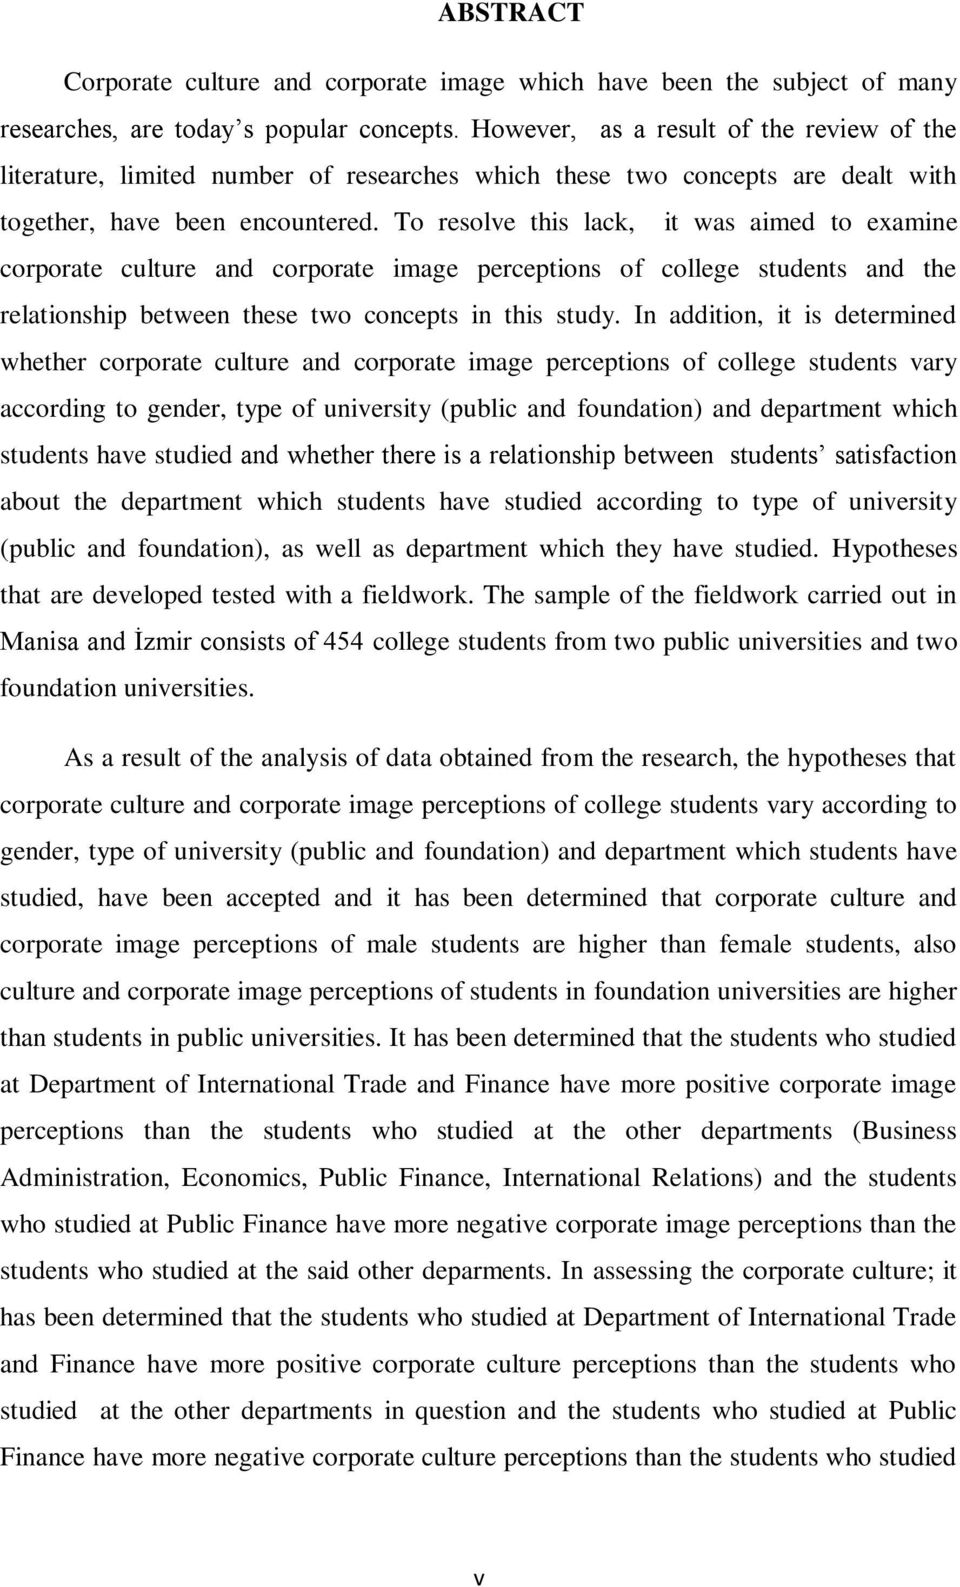 To resolve this lack, it was aimed to examine corporate culture and corporate image perceptions of college students and the relationship between these two concepts in this study.